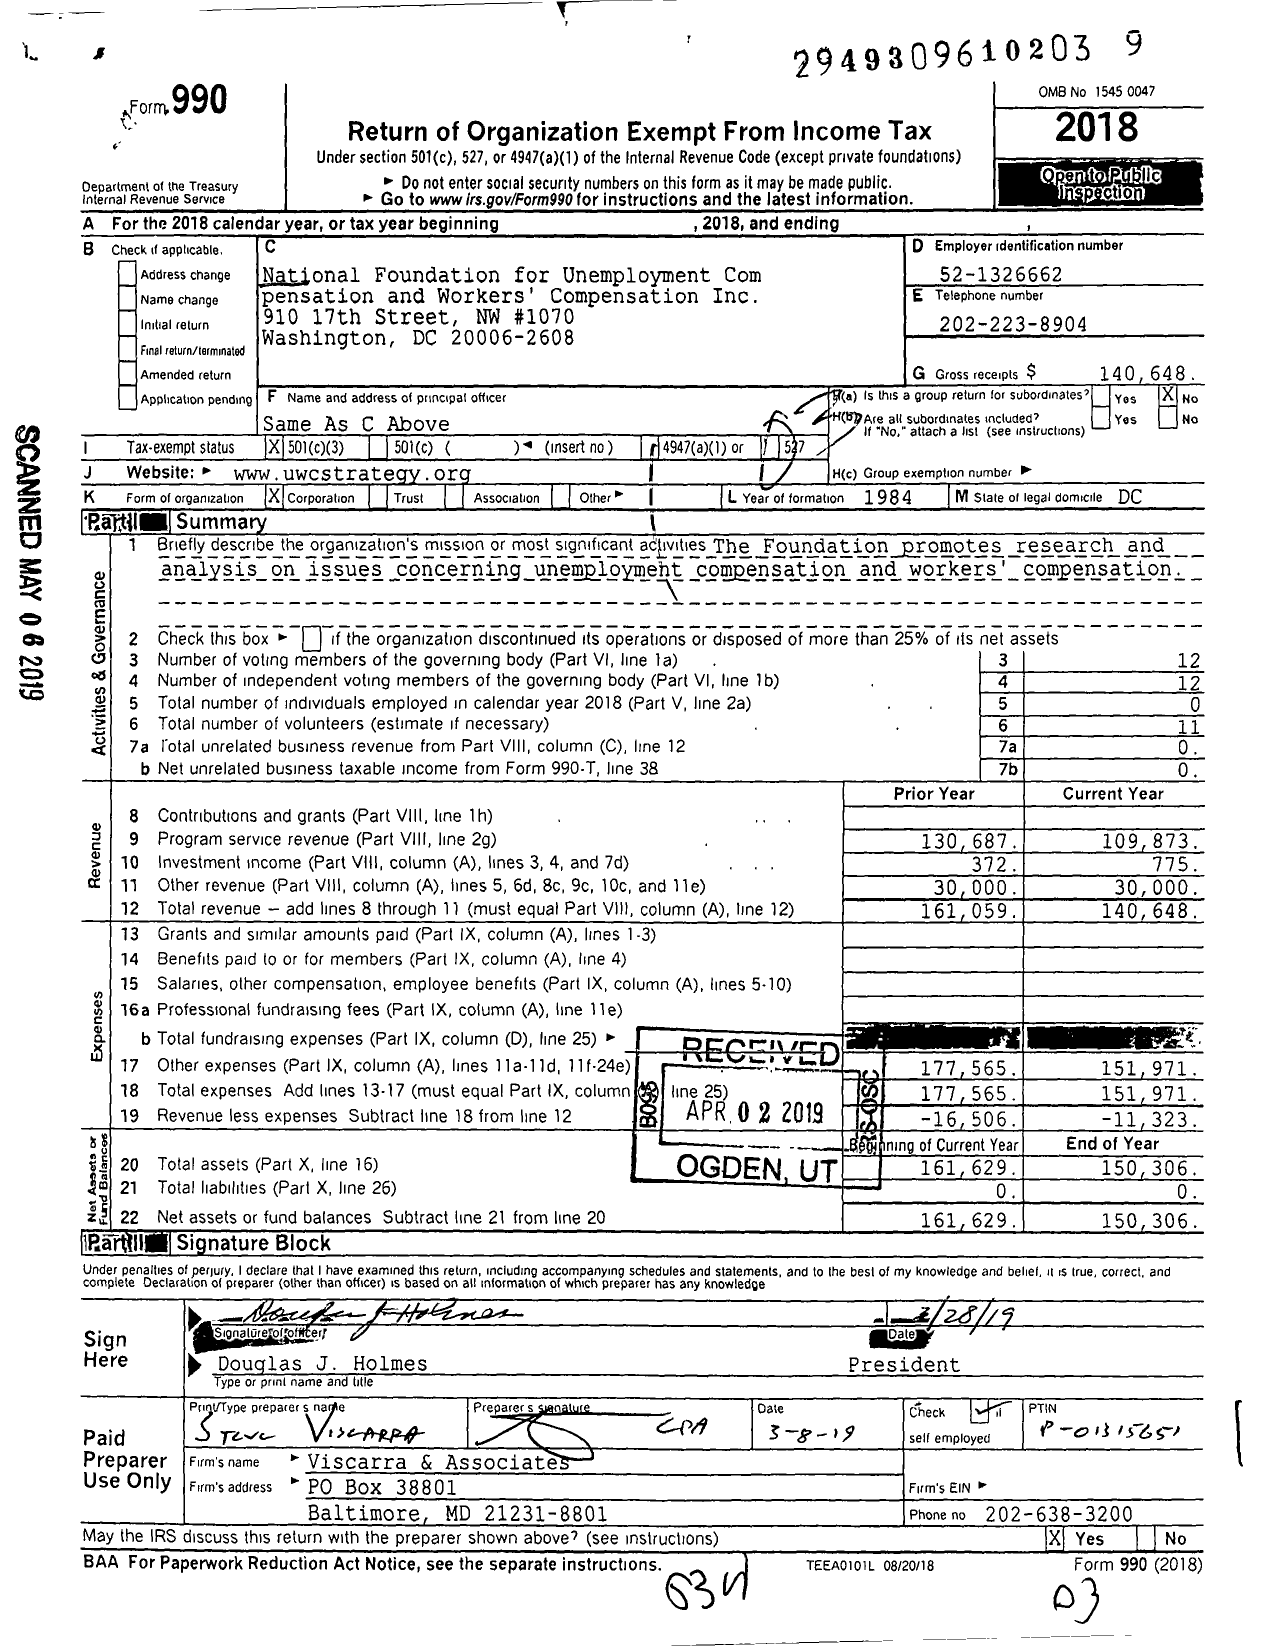 Image of first page of 2018 Form 990 for National Foundation for Unemployment Compensation pensation and Workers Compensation